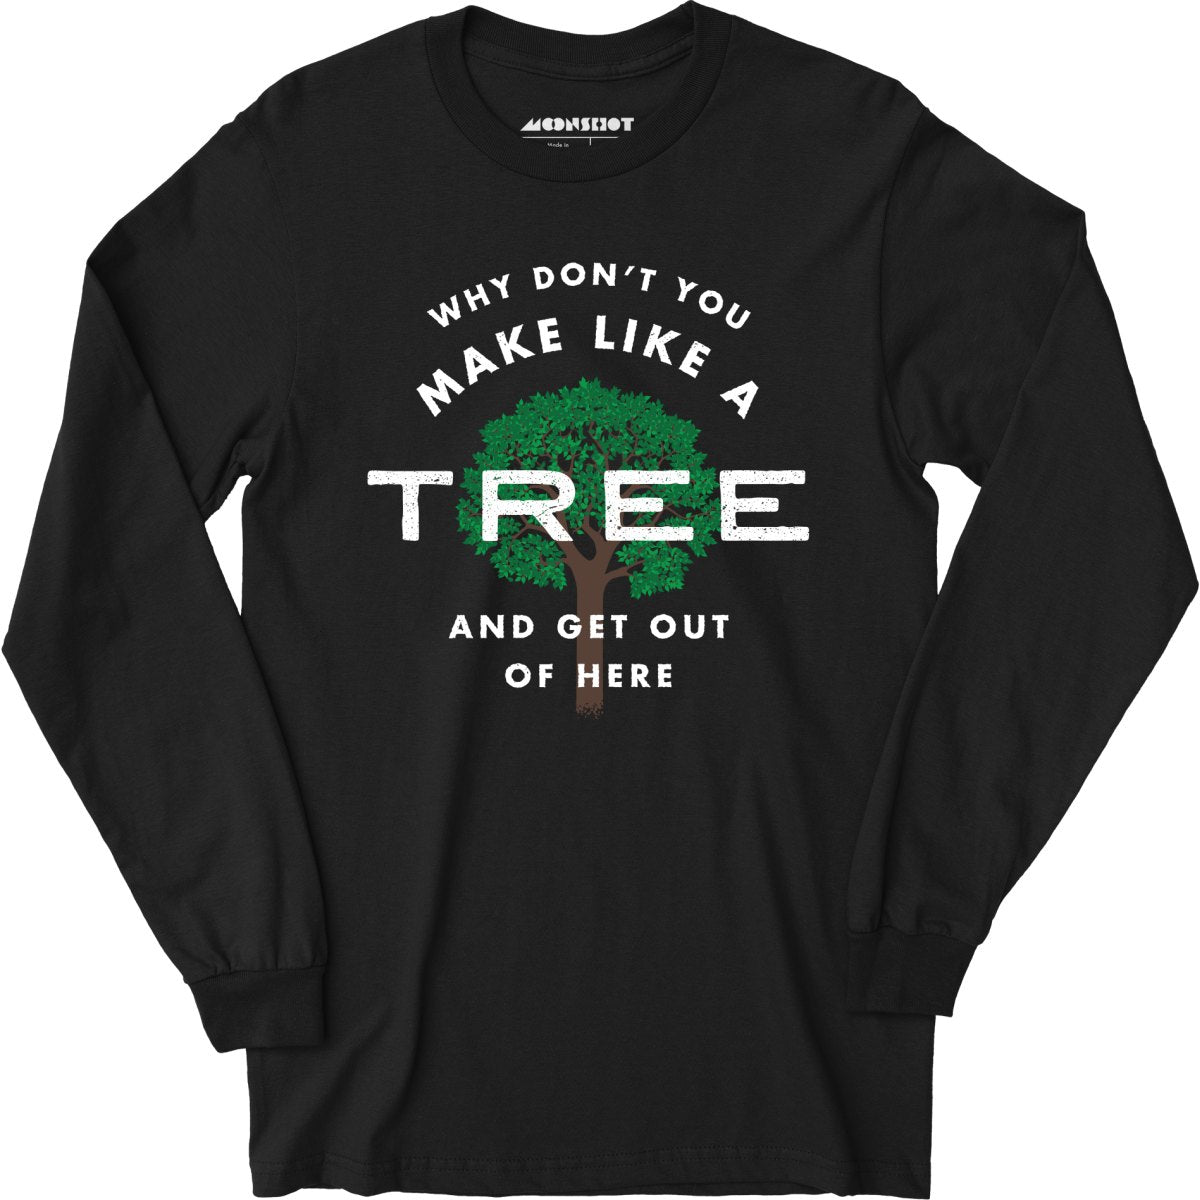 Why Don't You Make Like a Tree and Get Out of Here - Long Sleeve T-Shirt